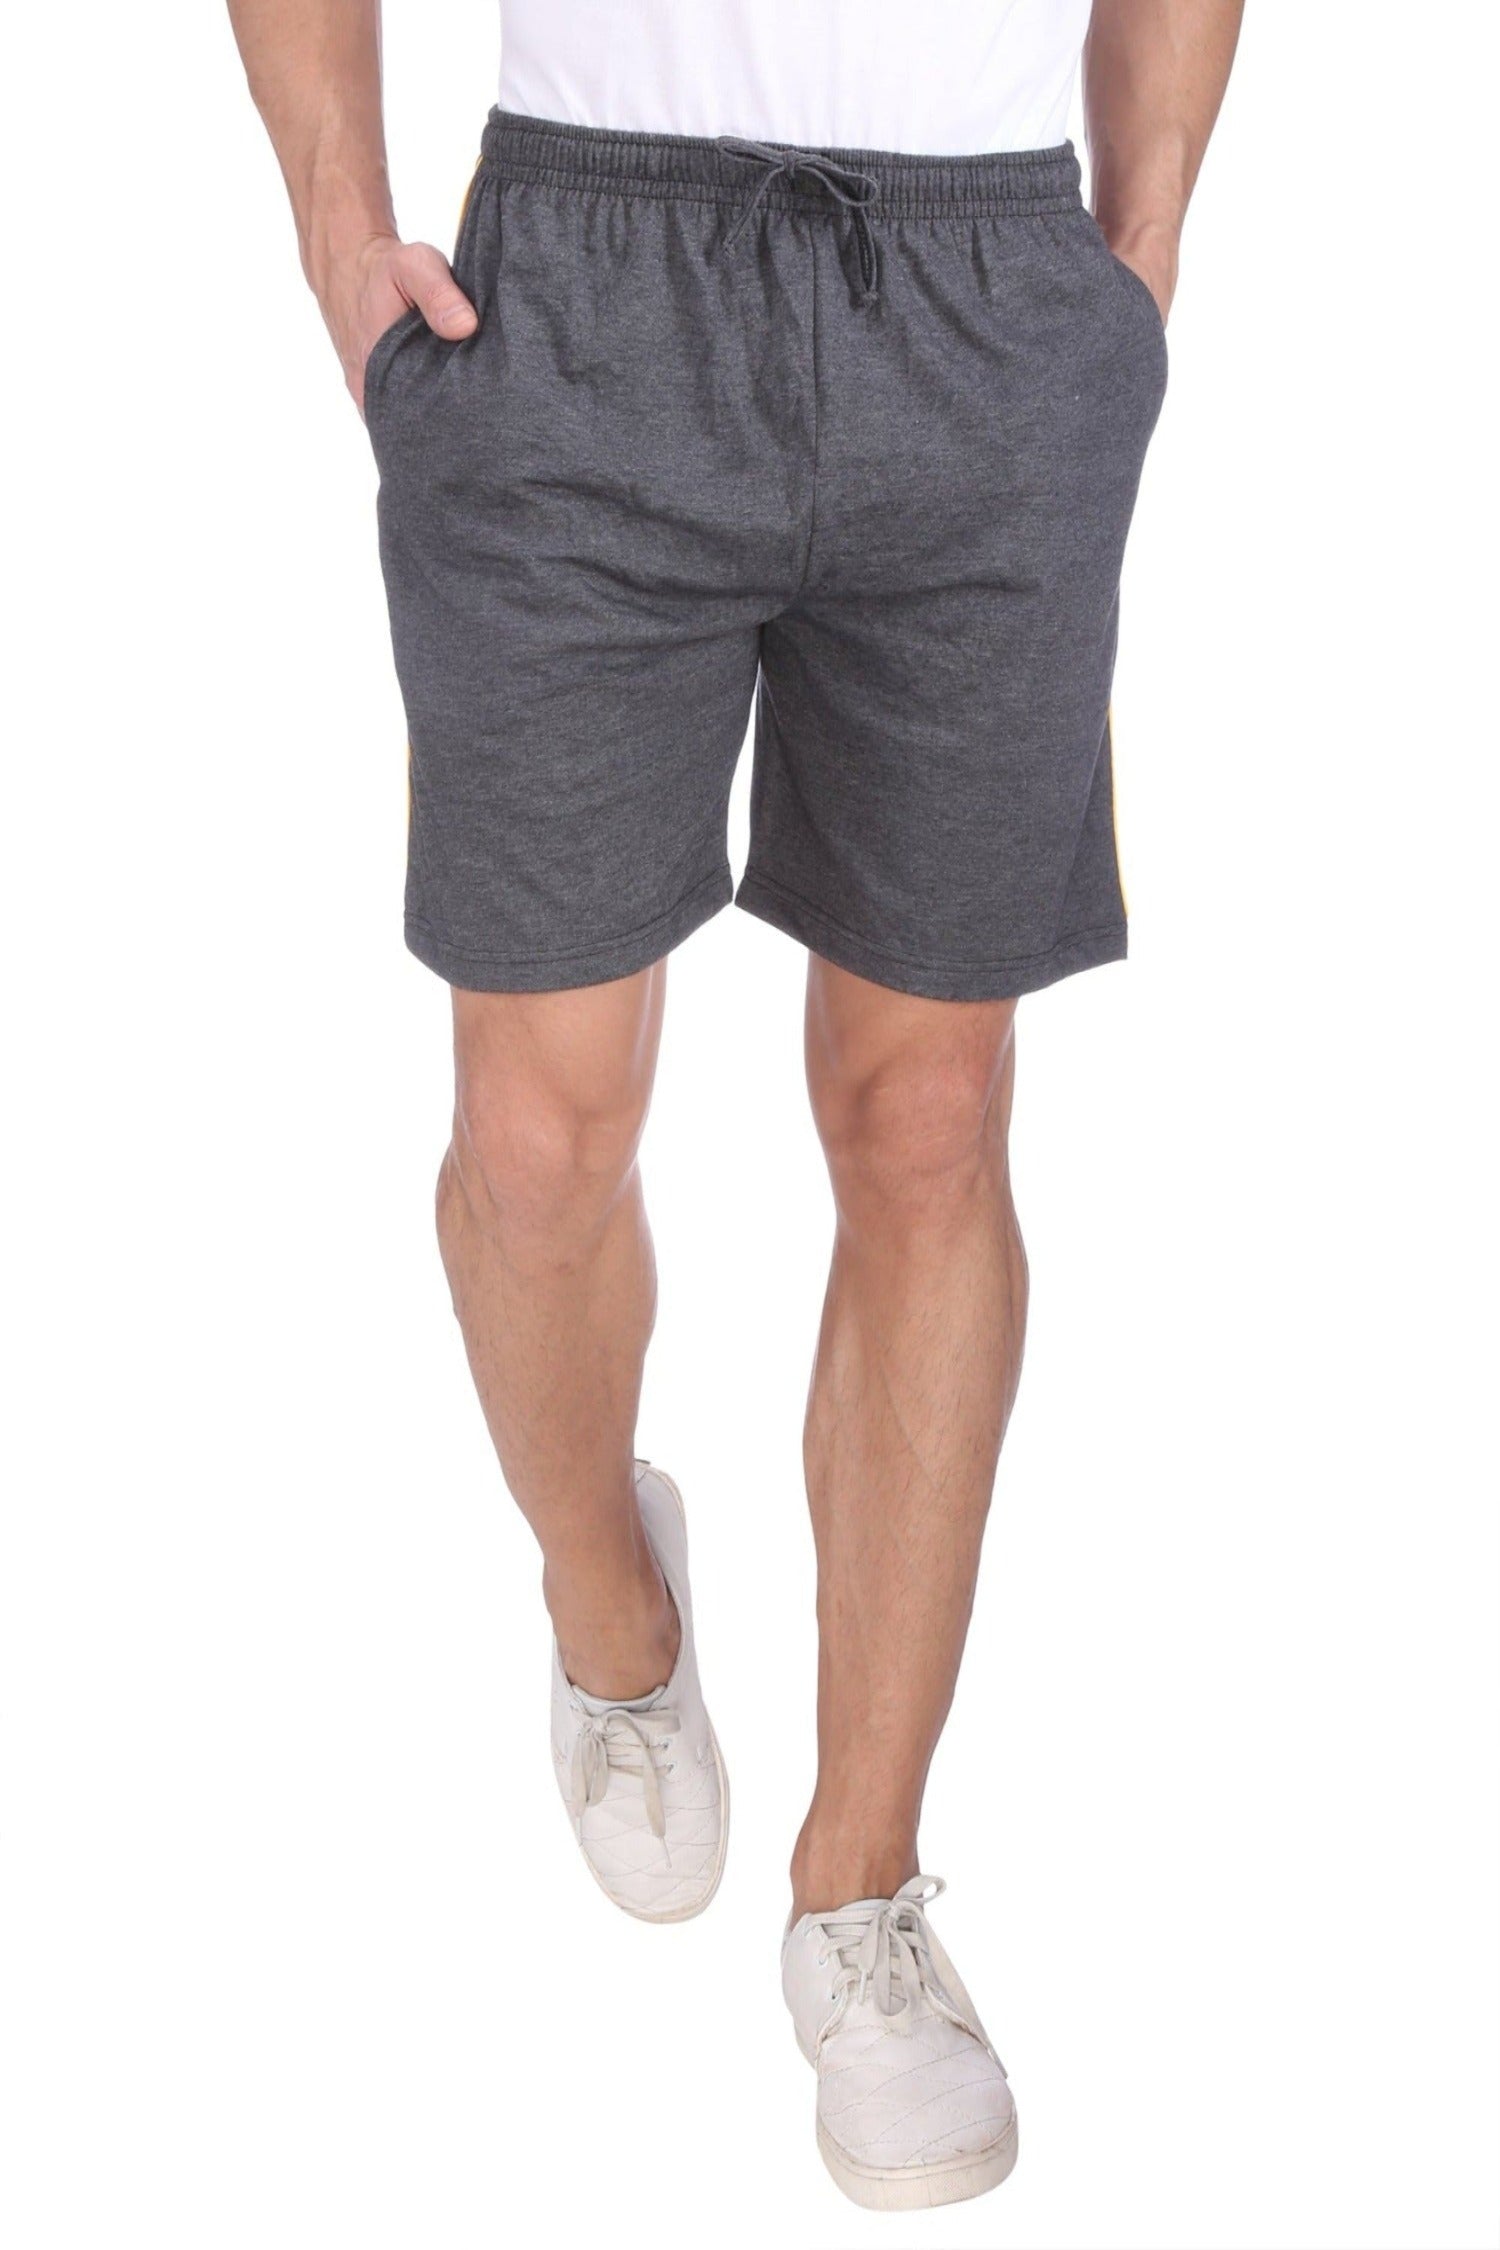 Big Sizes Cotton Jersey Shorts, Black Navy Grey 2X-10X, That fit and Last  (2XB (46/48), Black) at  Men's Clothing store